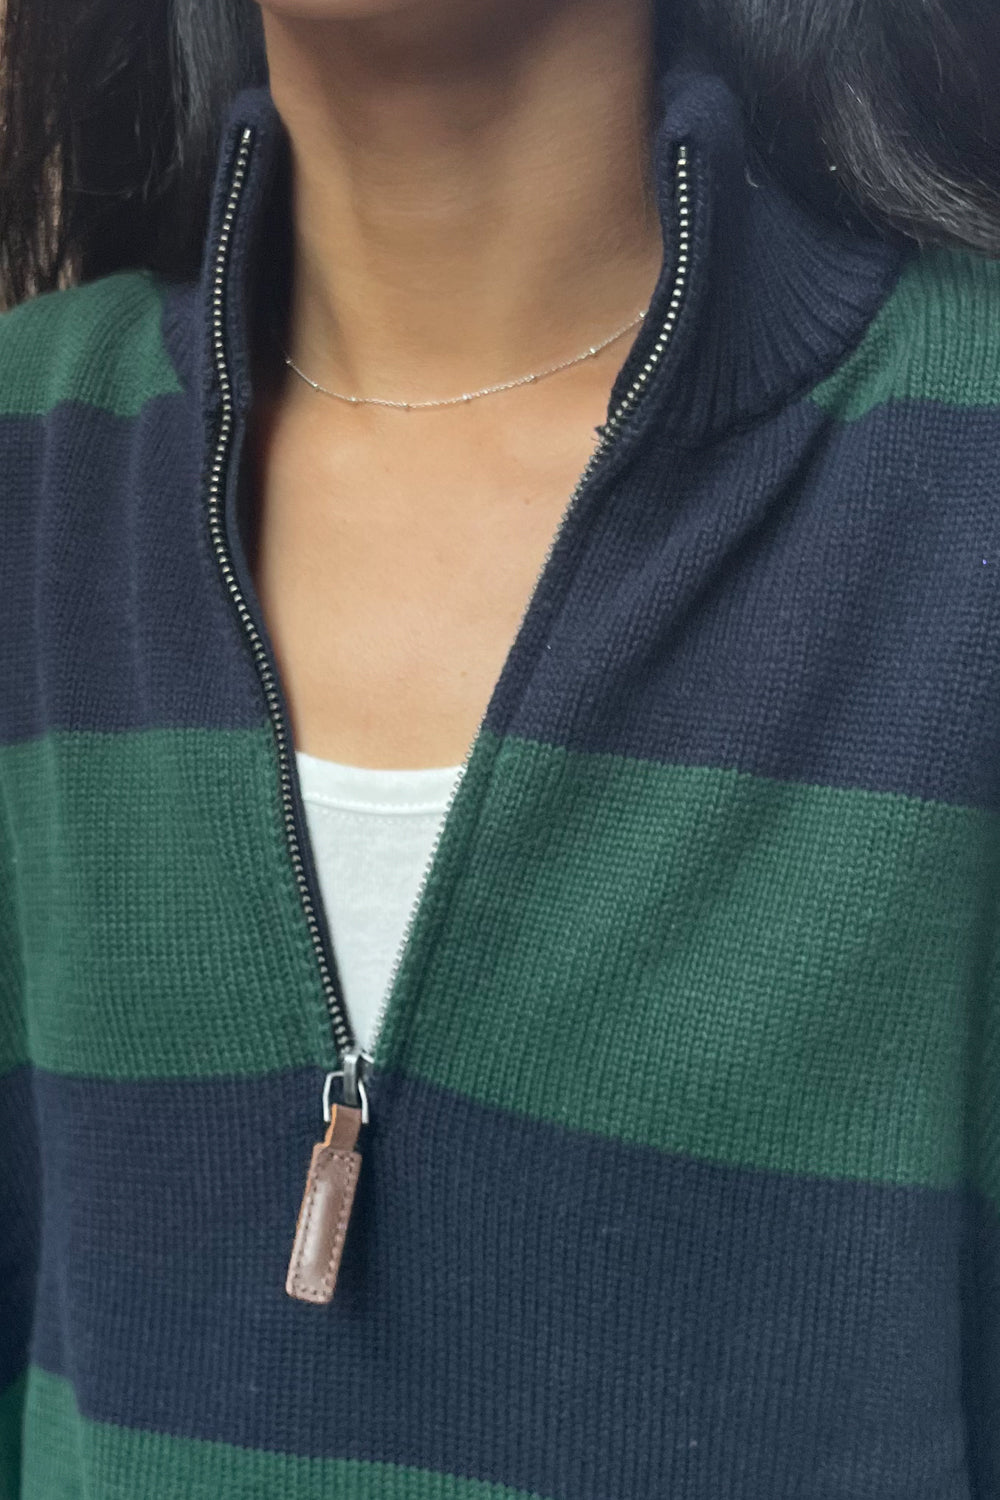 Navy Blue And Dark Green Stripes / Oversized Fit